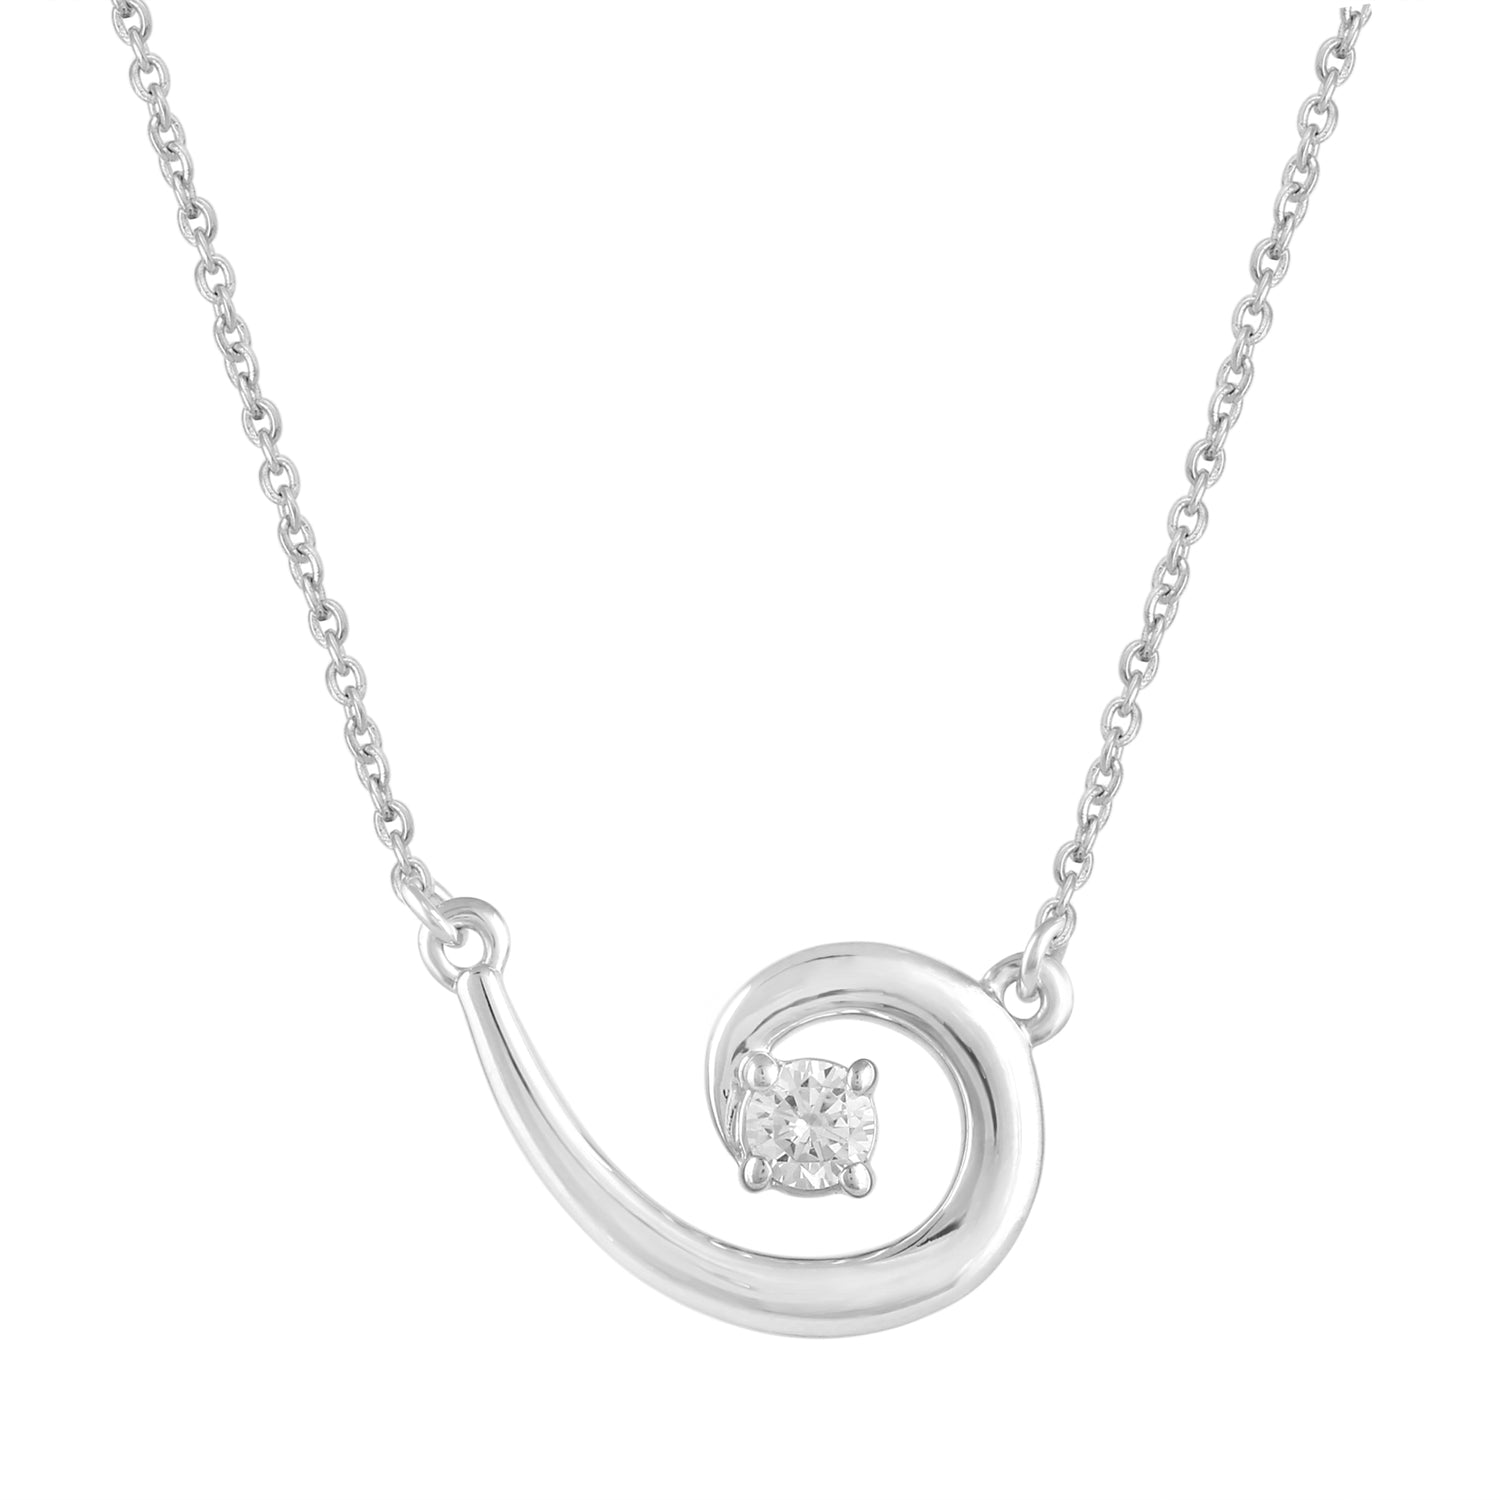 1/10 CT TW Diamond Floating Stone Swirl Pendant Necklace in 925 Sterling Silver